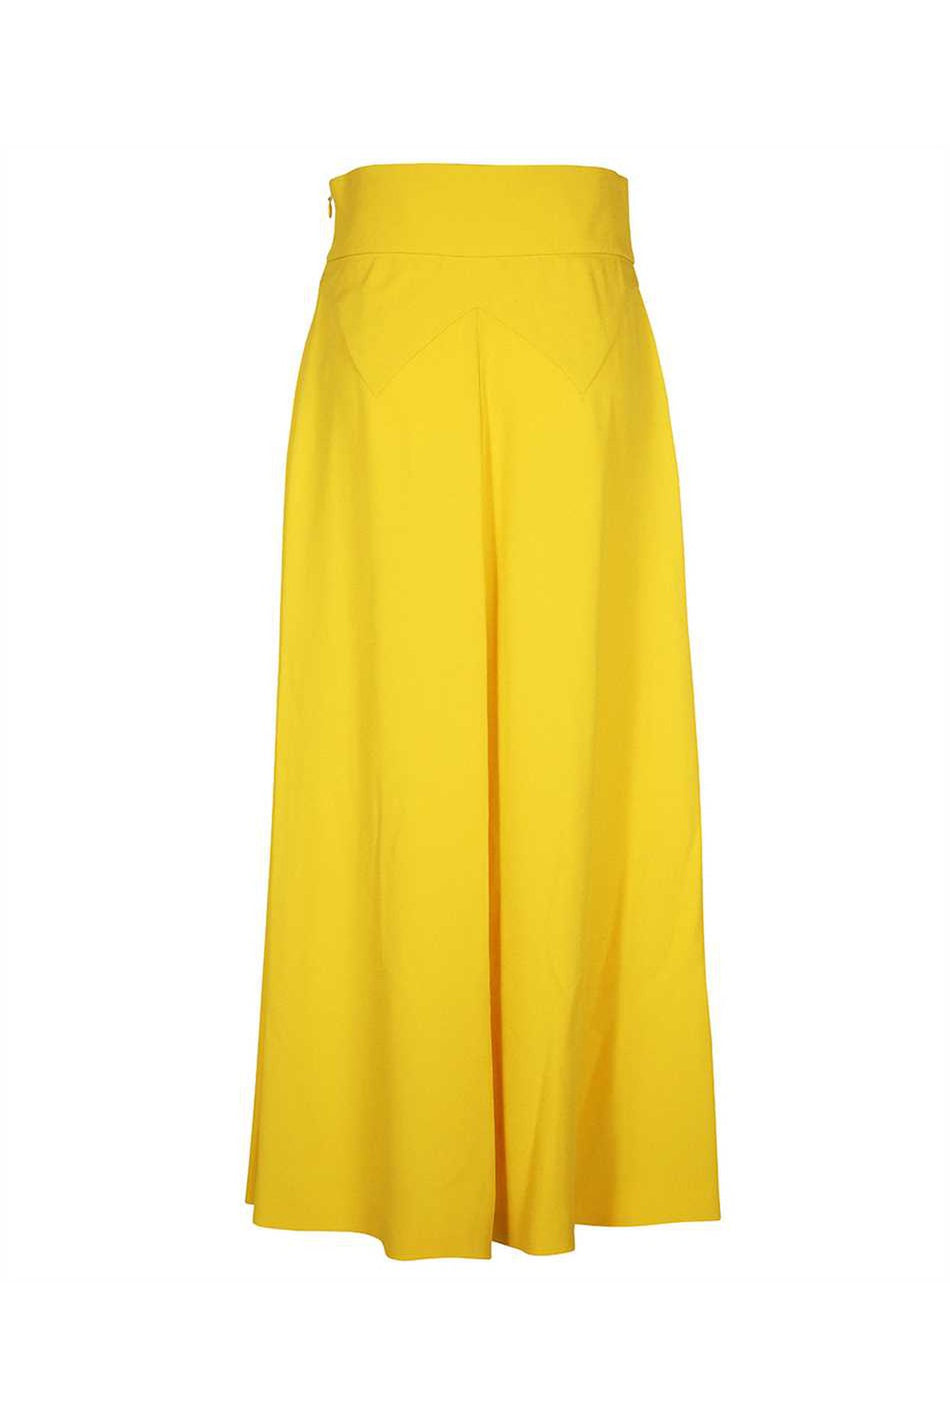 Long skirt-Moschino-OUTLET-SALE-44-ARCHIVIST